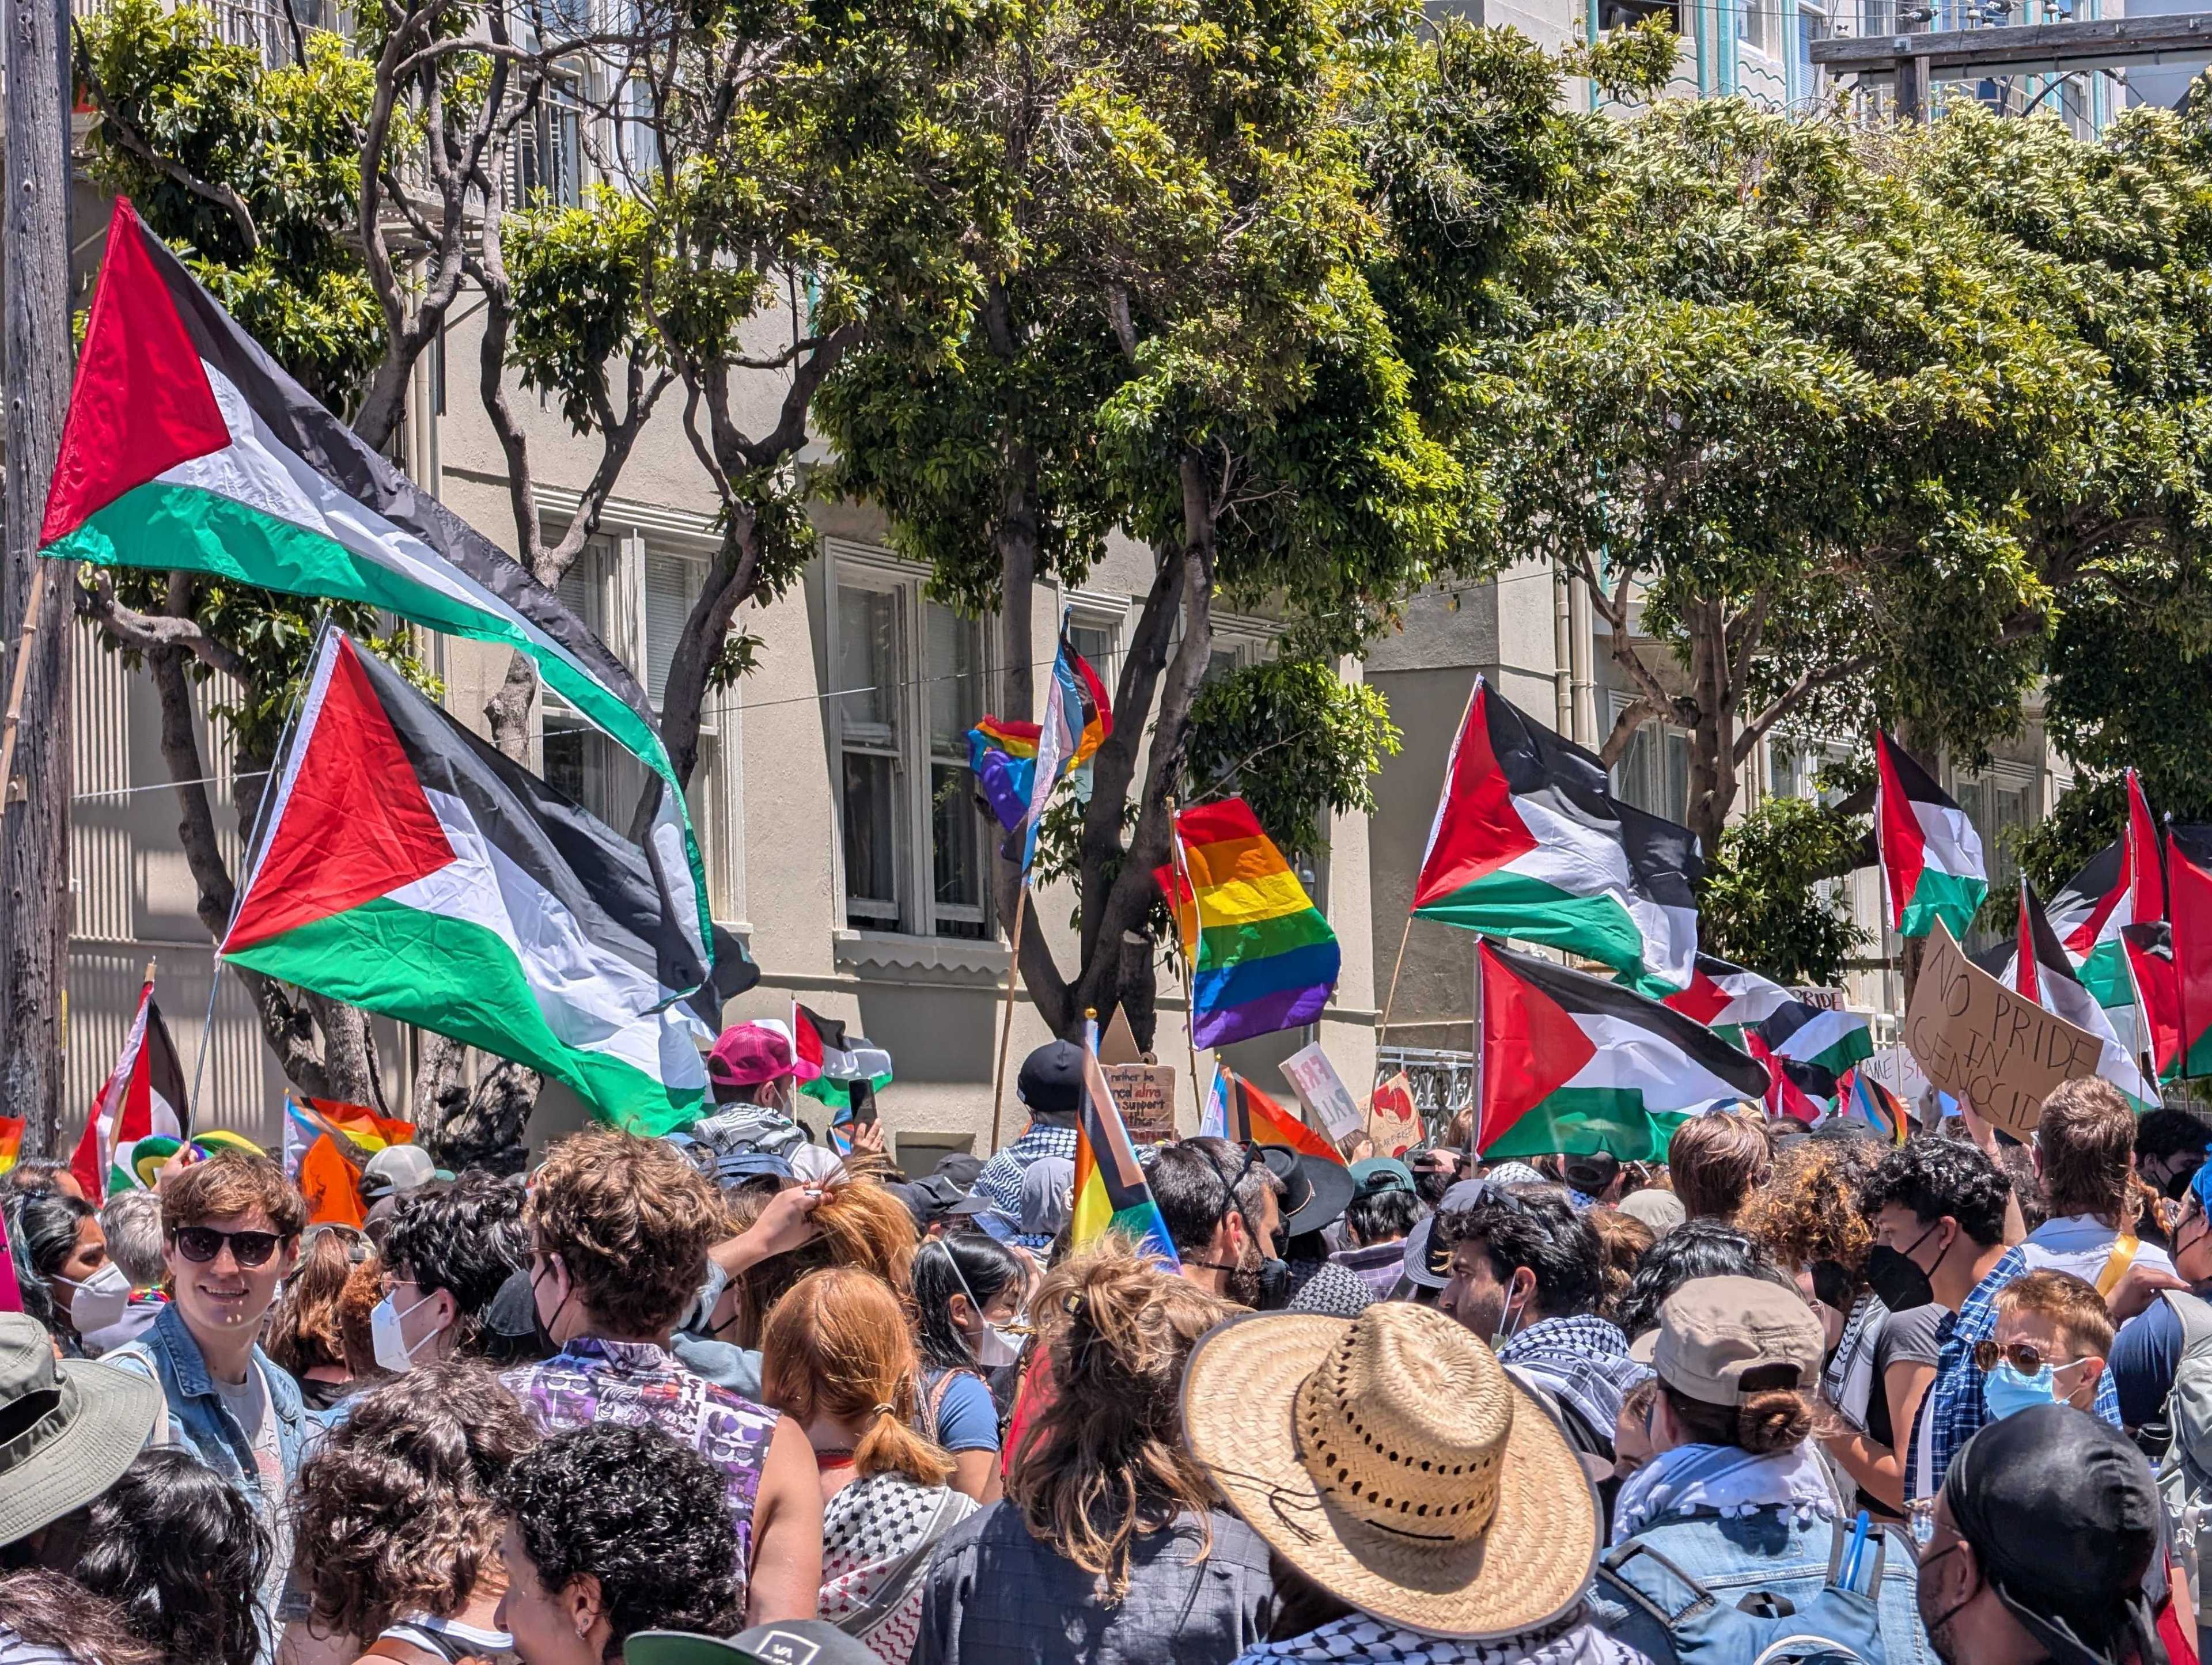 A crowd of people is gathered in a street holding Palestinian and rainbow flags. Some carry signs and wear masks, while tall trees provide shade from the sun.